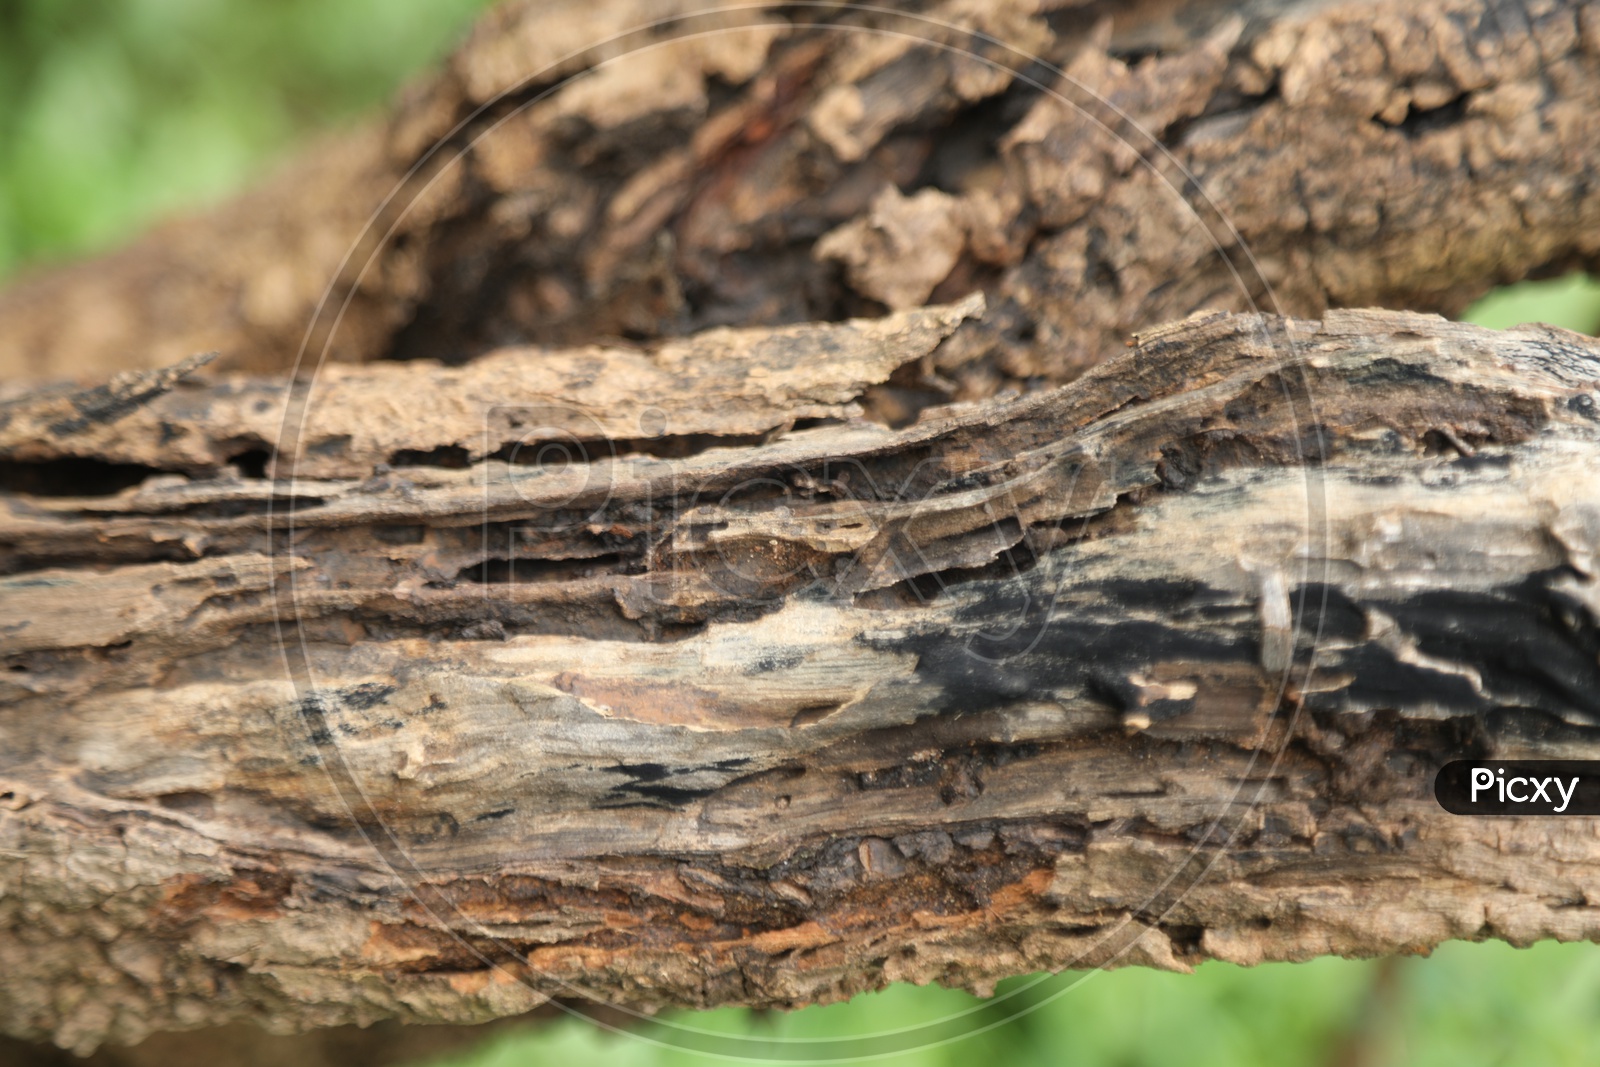 Borer Patches of the bark